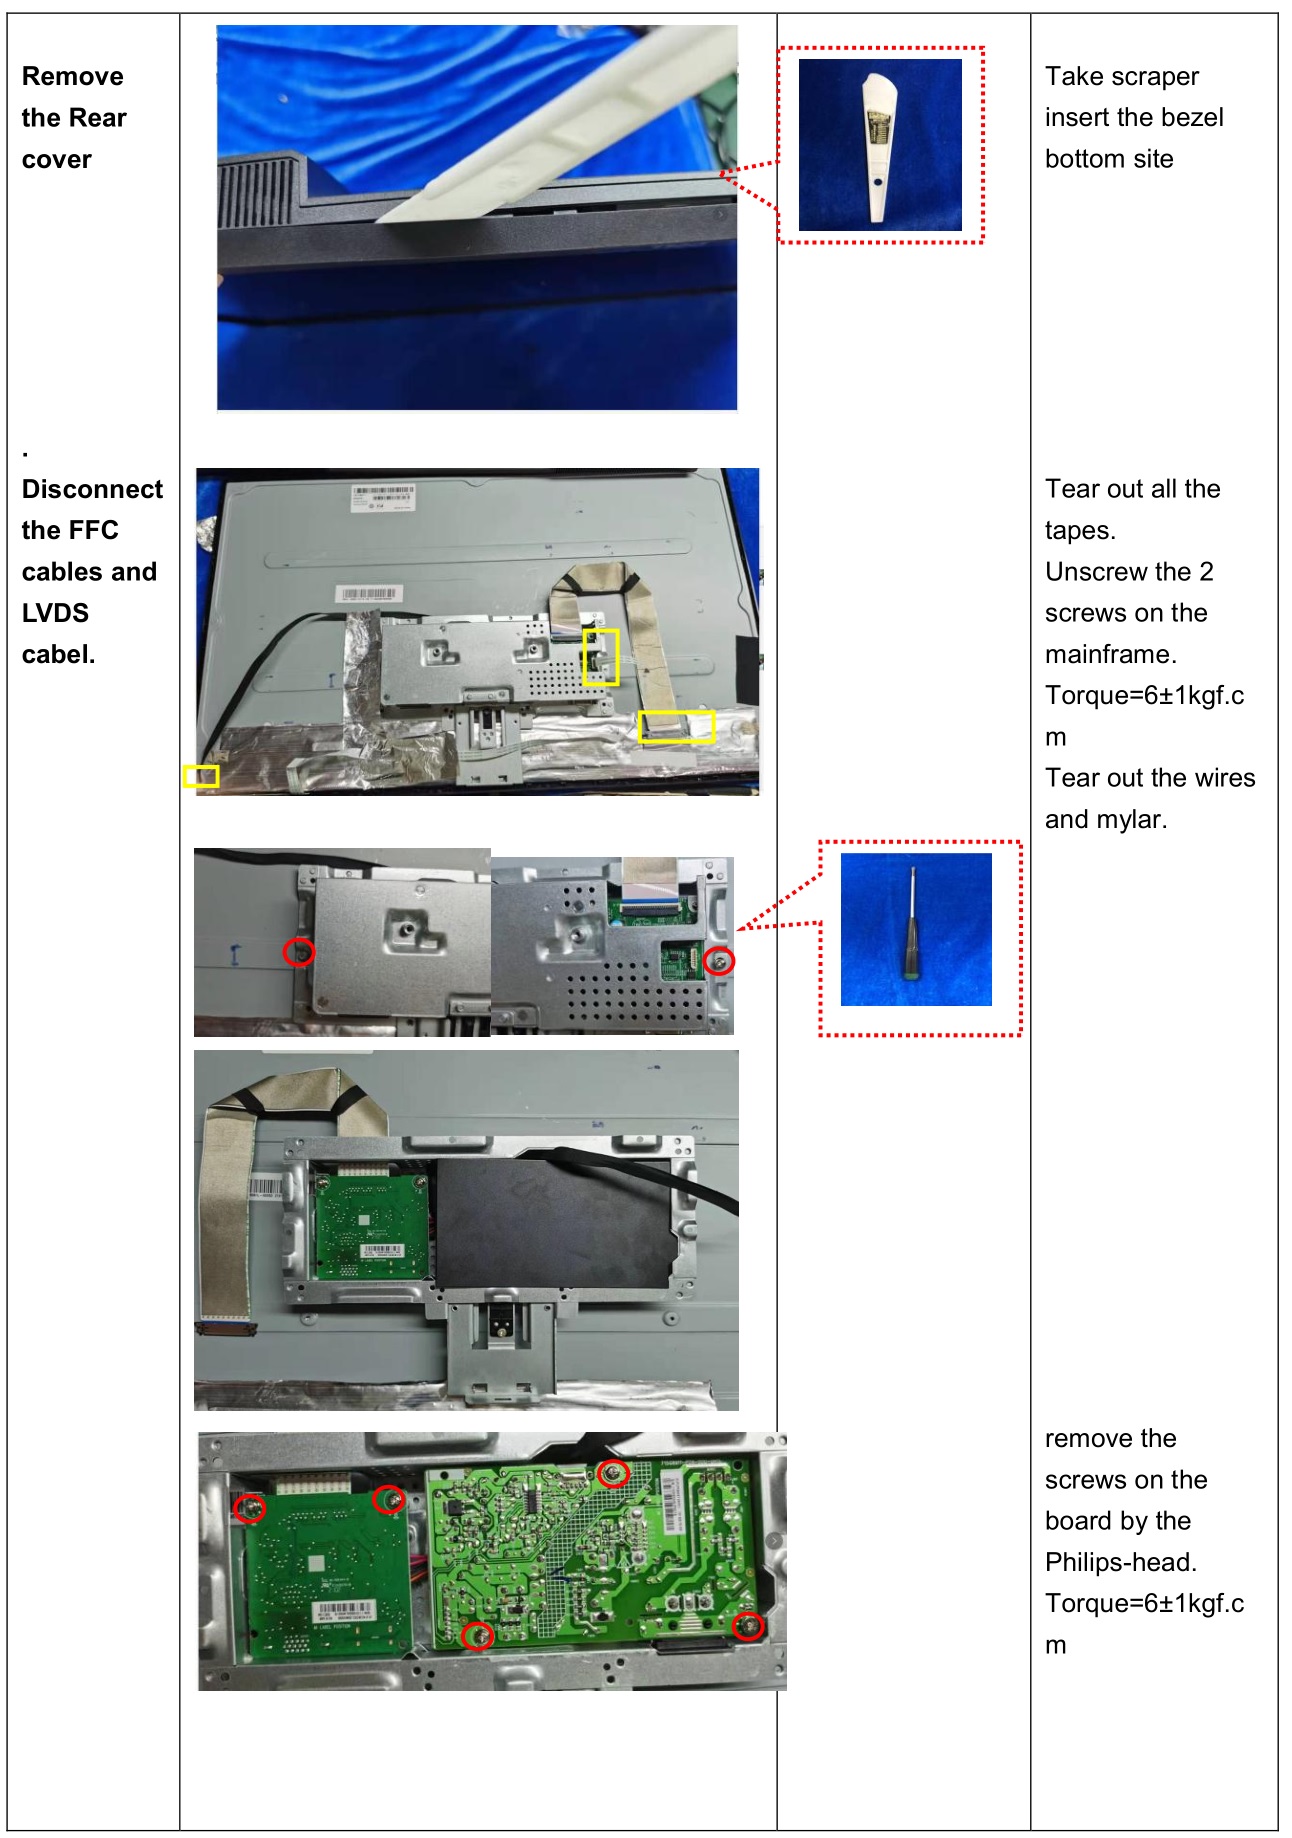 Dell SE2722H Monitor Teardown Instructions - Disassembly Procedures 2